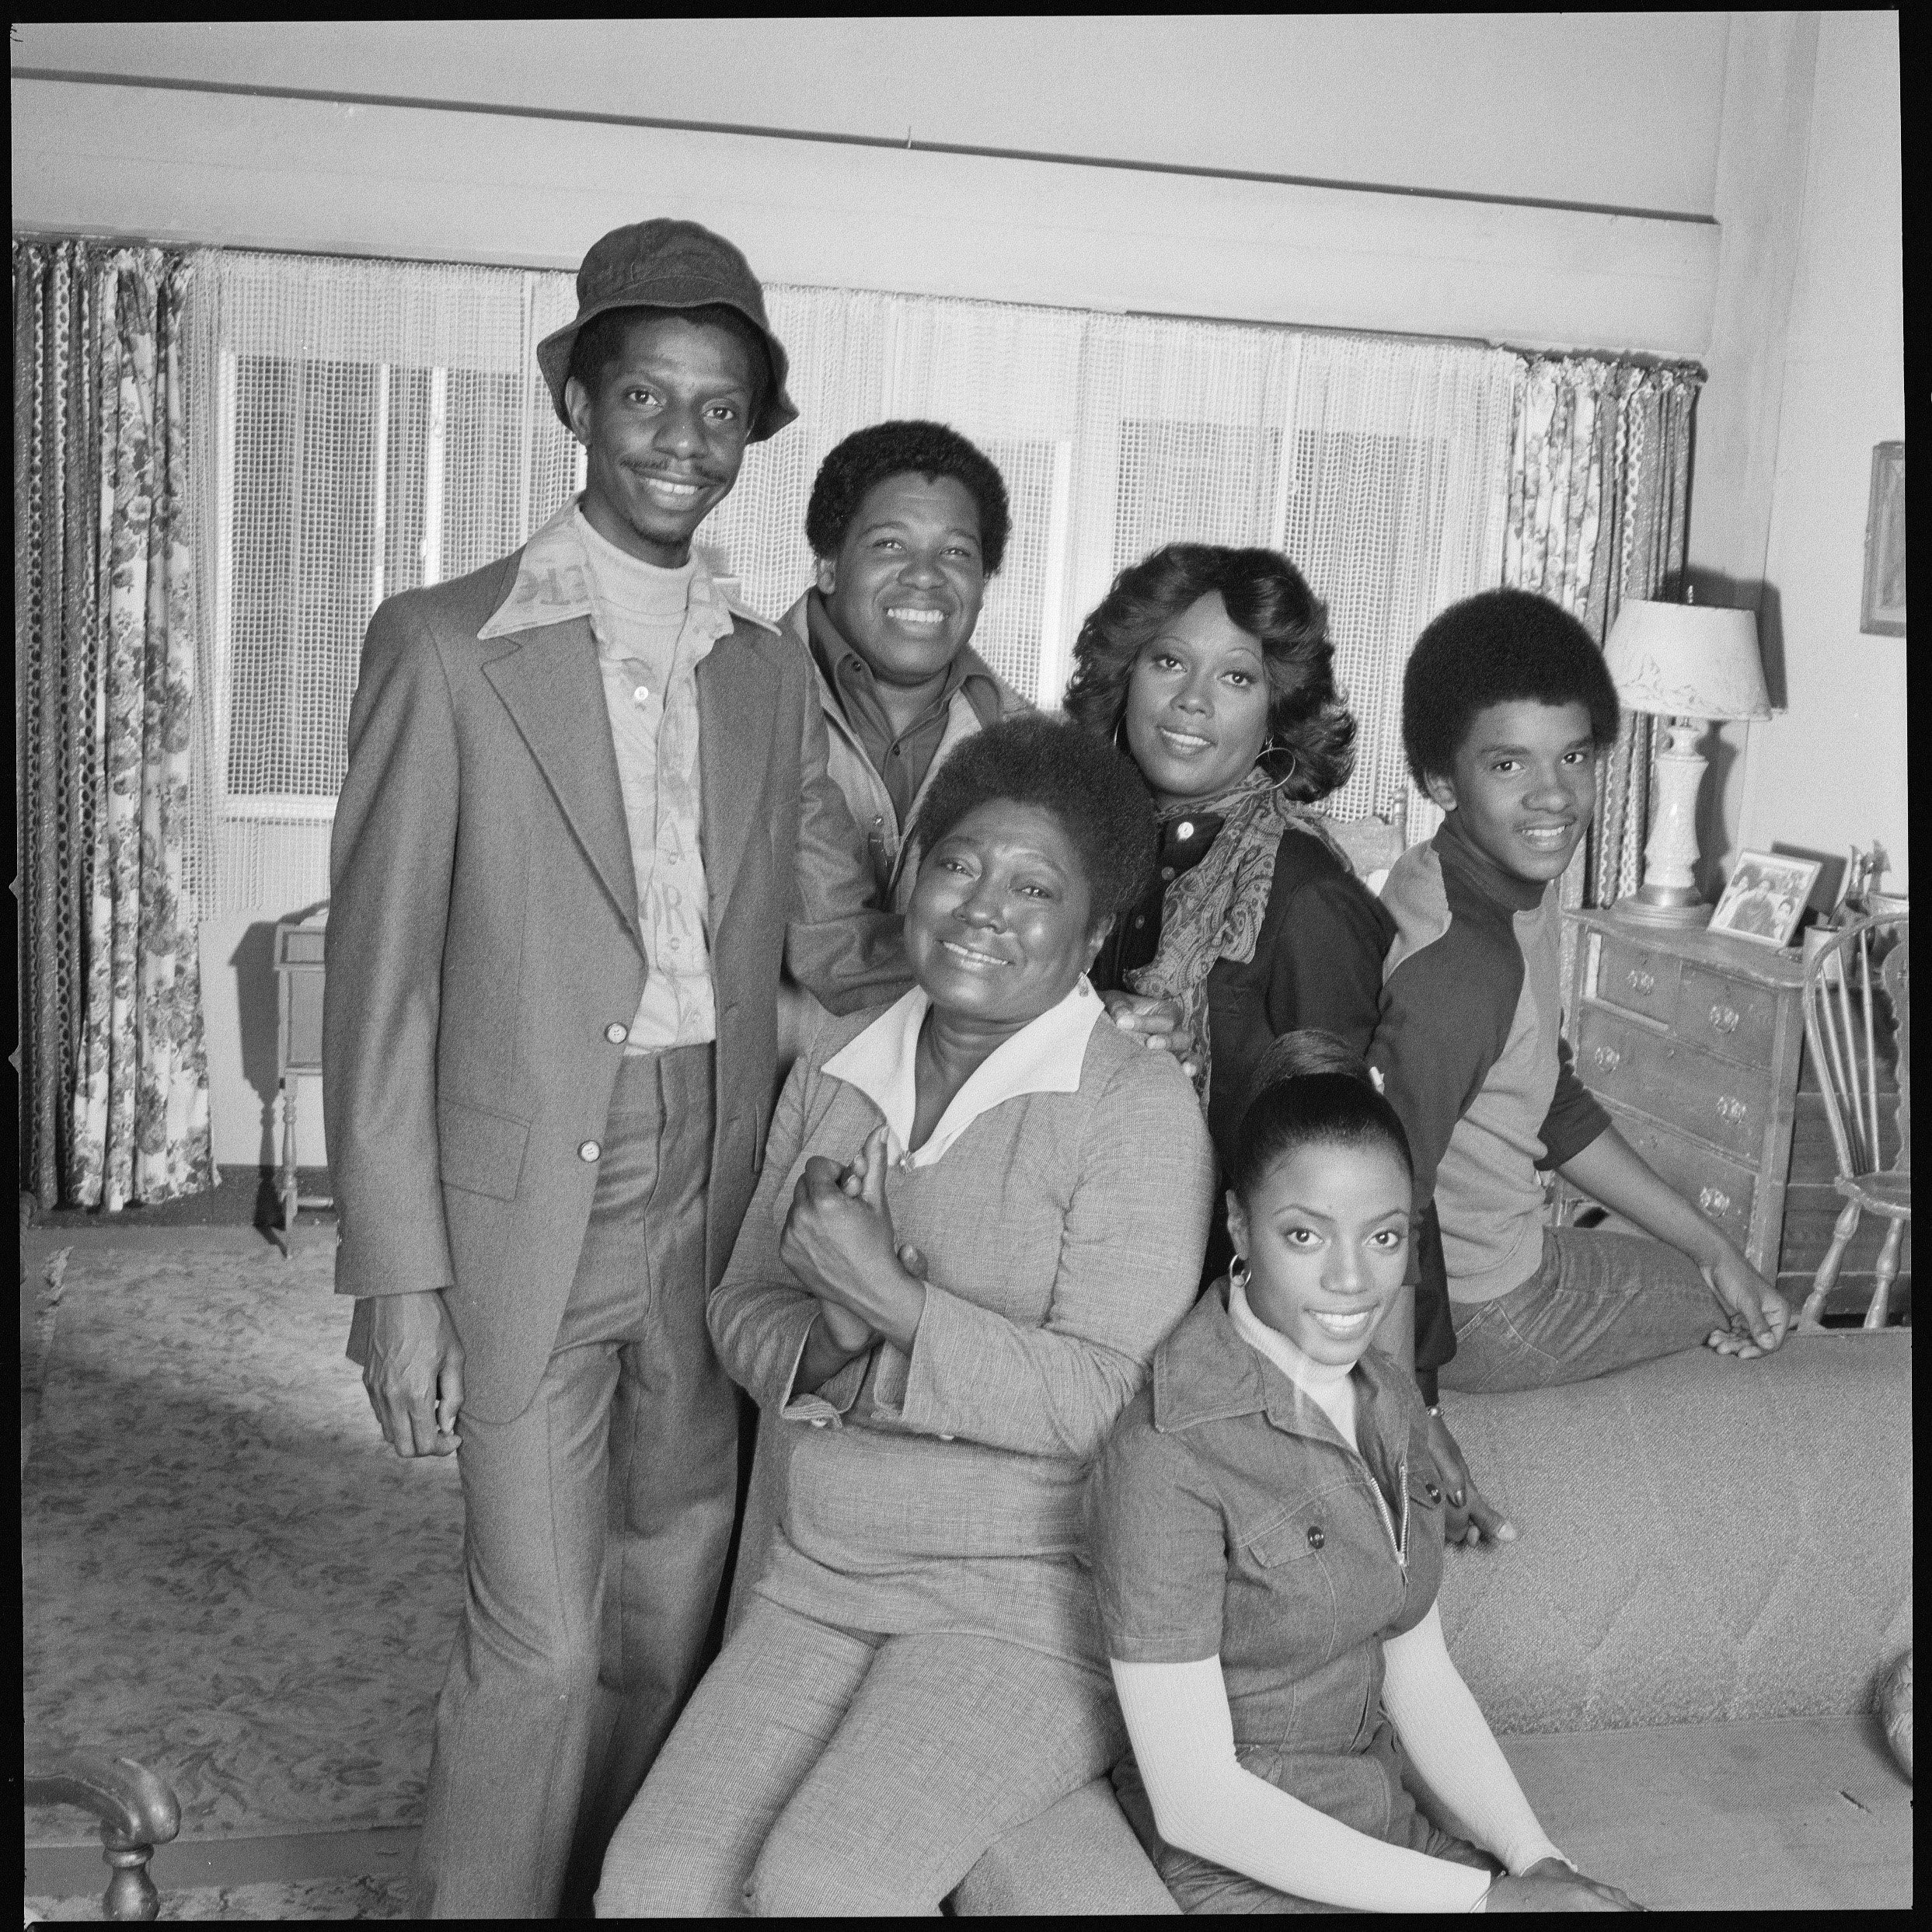 Jimmie Walker, Johnny Brown, Ja'net DuBois, and Ralph Carter pose for a portrait in the late ate 1970s. | Source: Getty Images